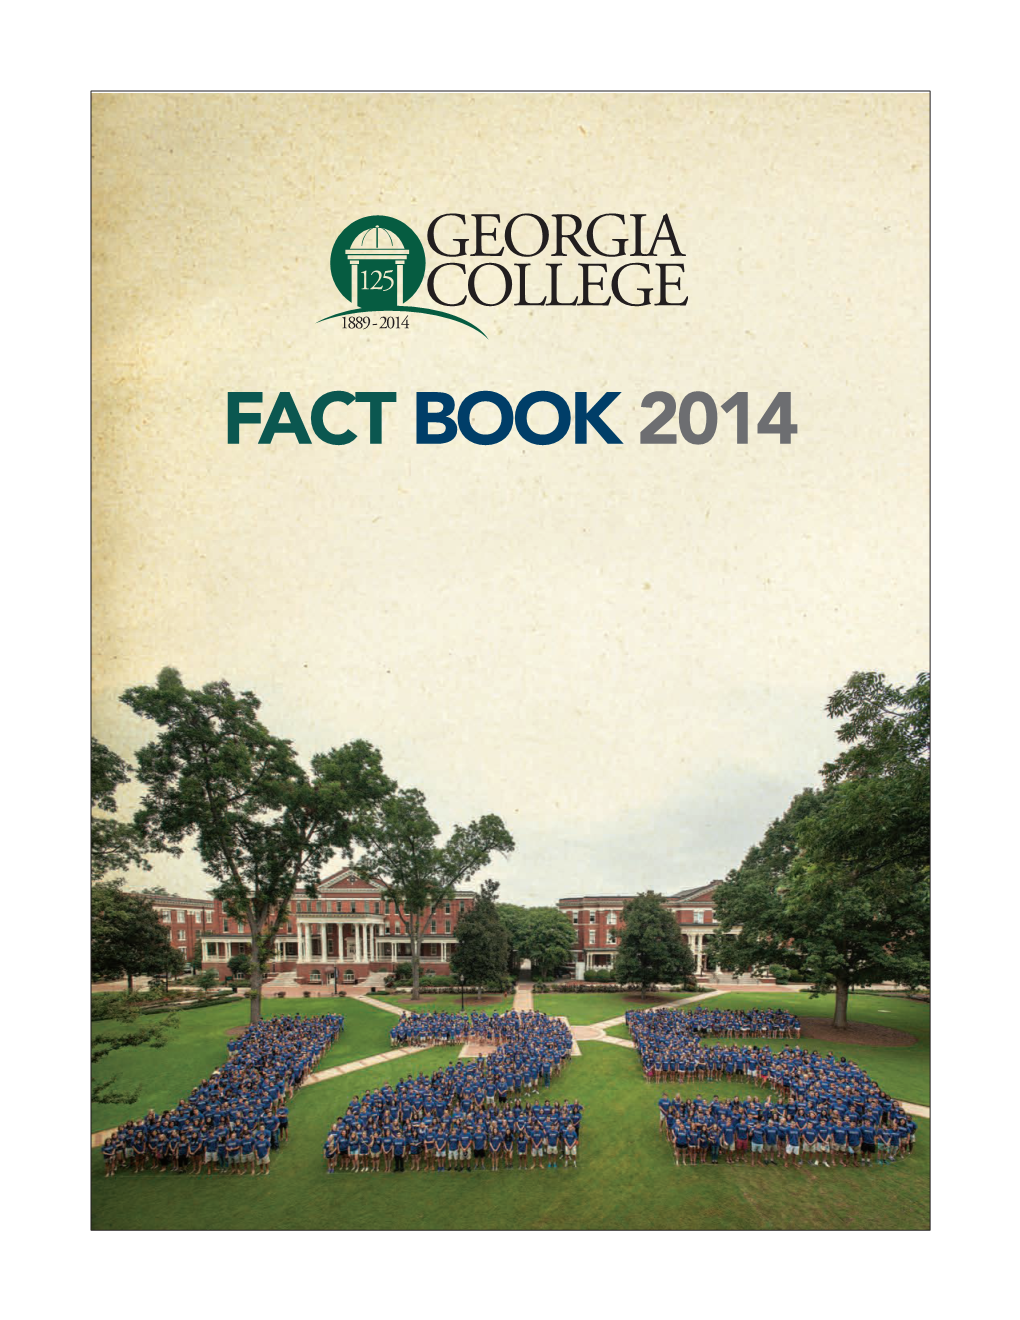 Fact Book 2014 Download